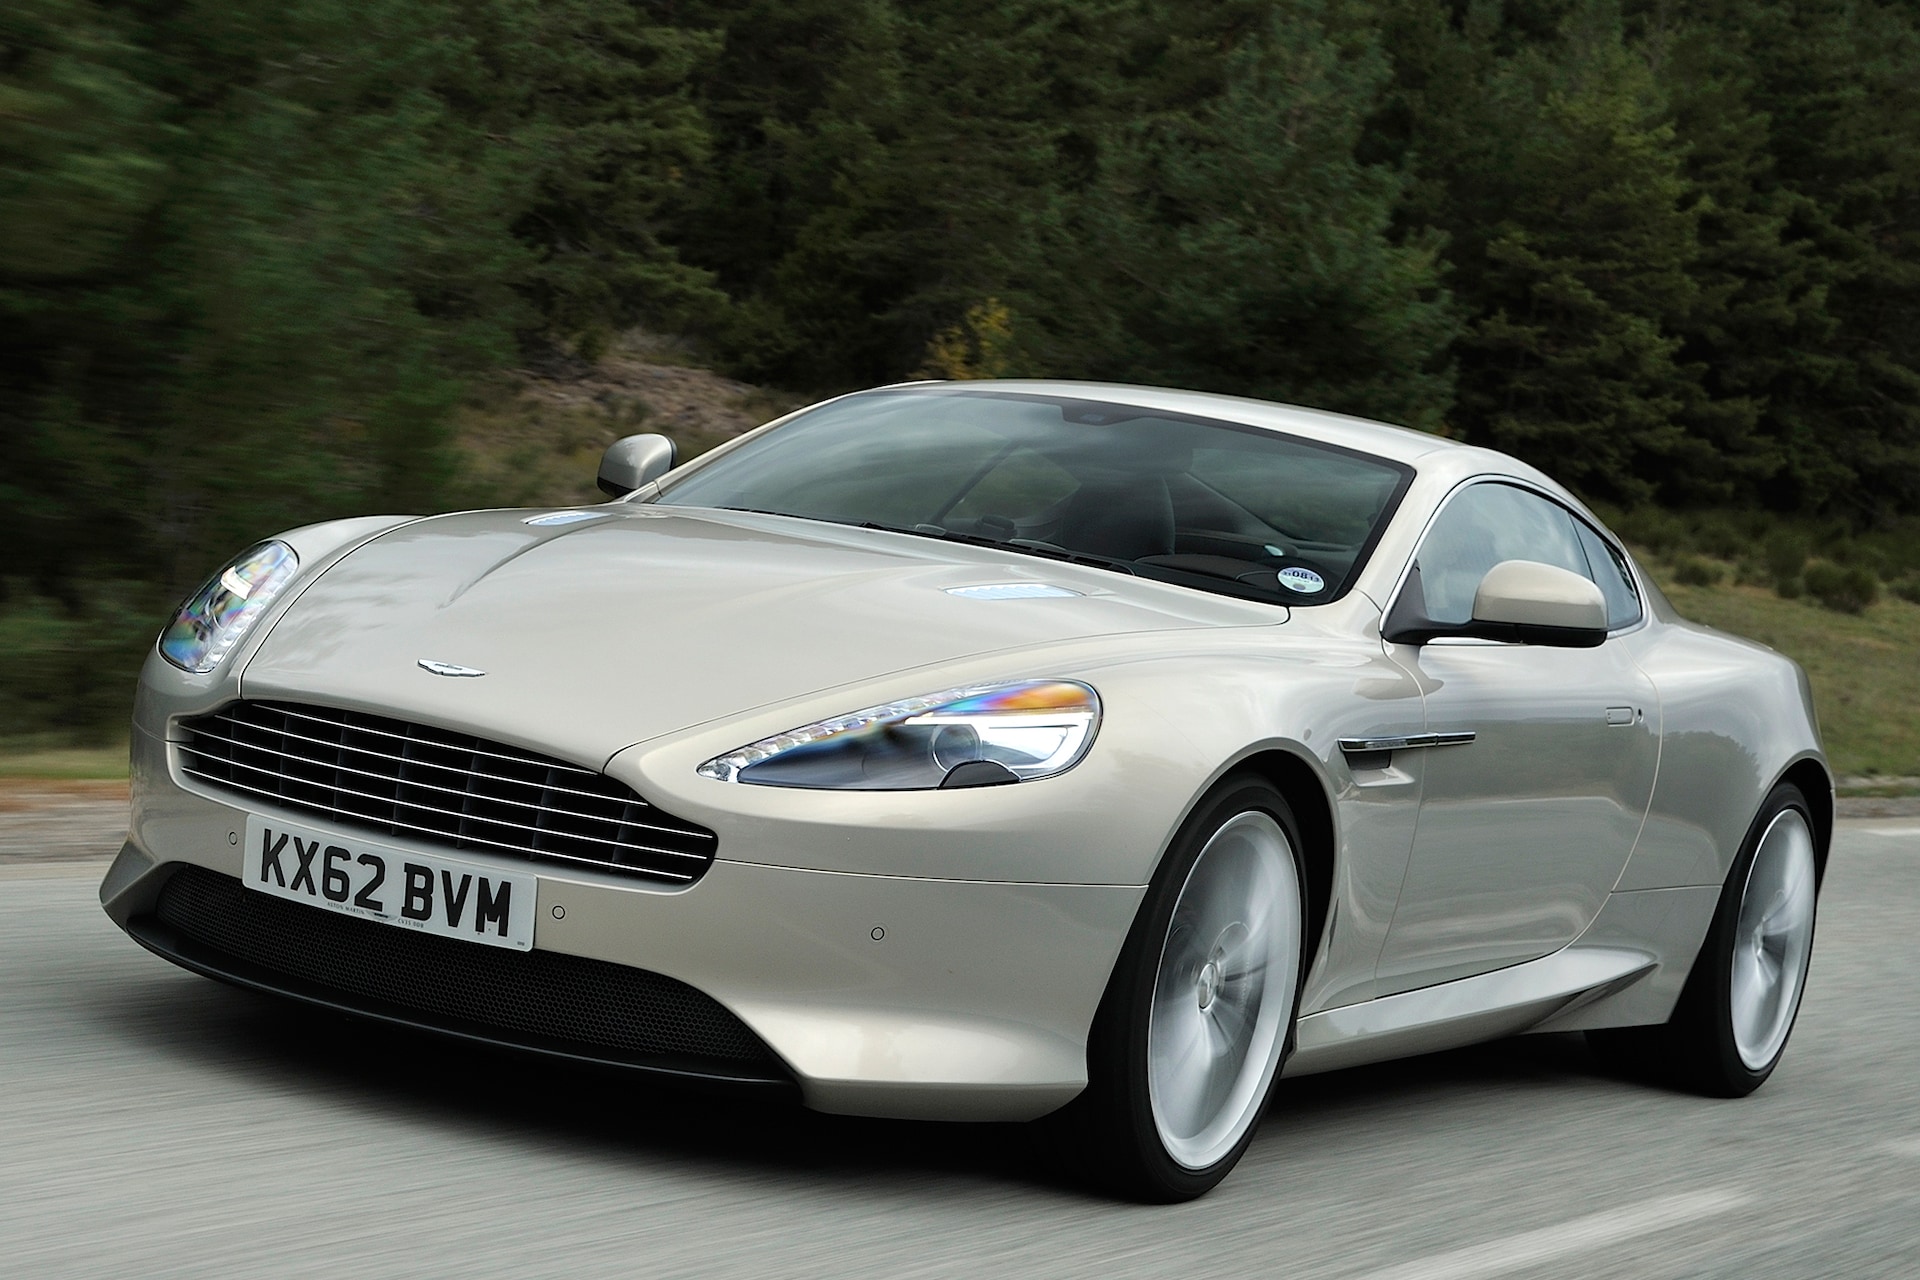 New Details Emerge on Redesigned 2017 Aston Martin DB9